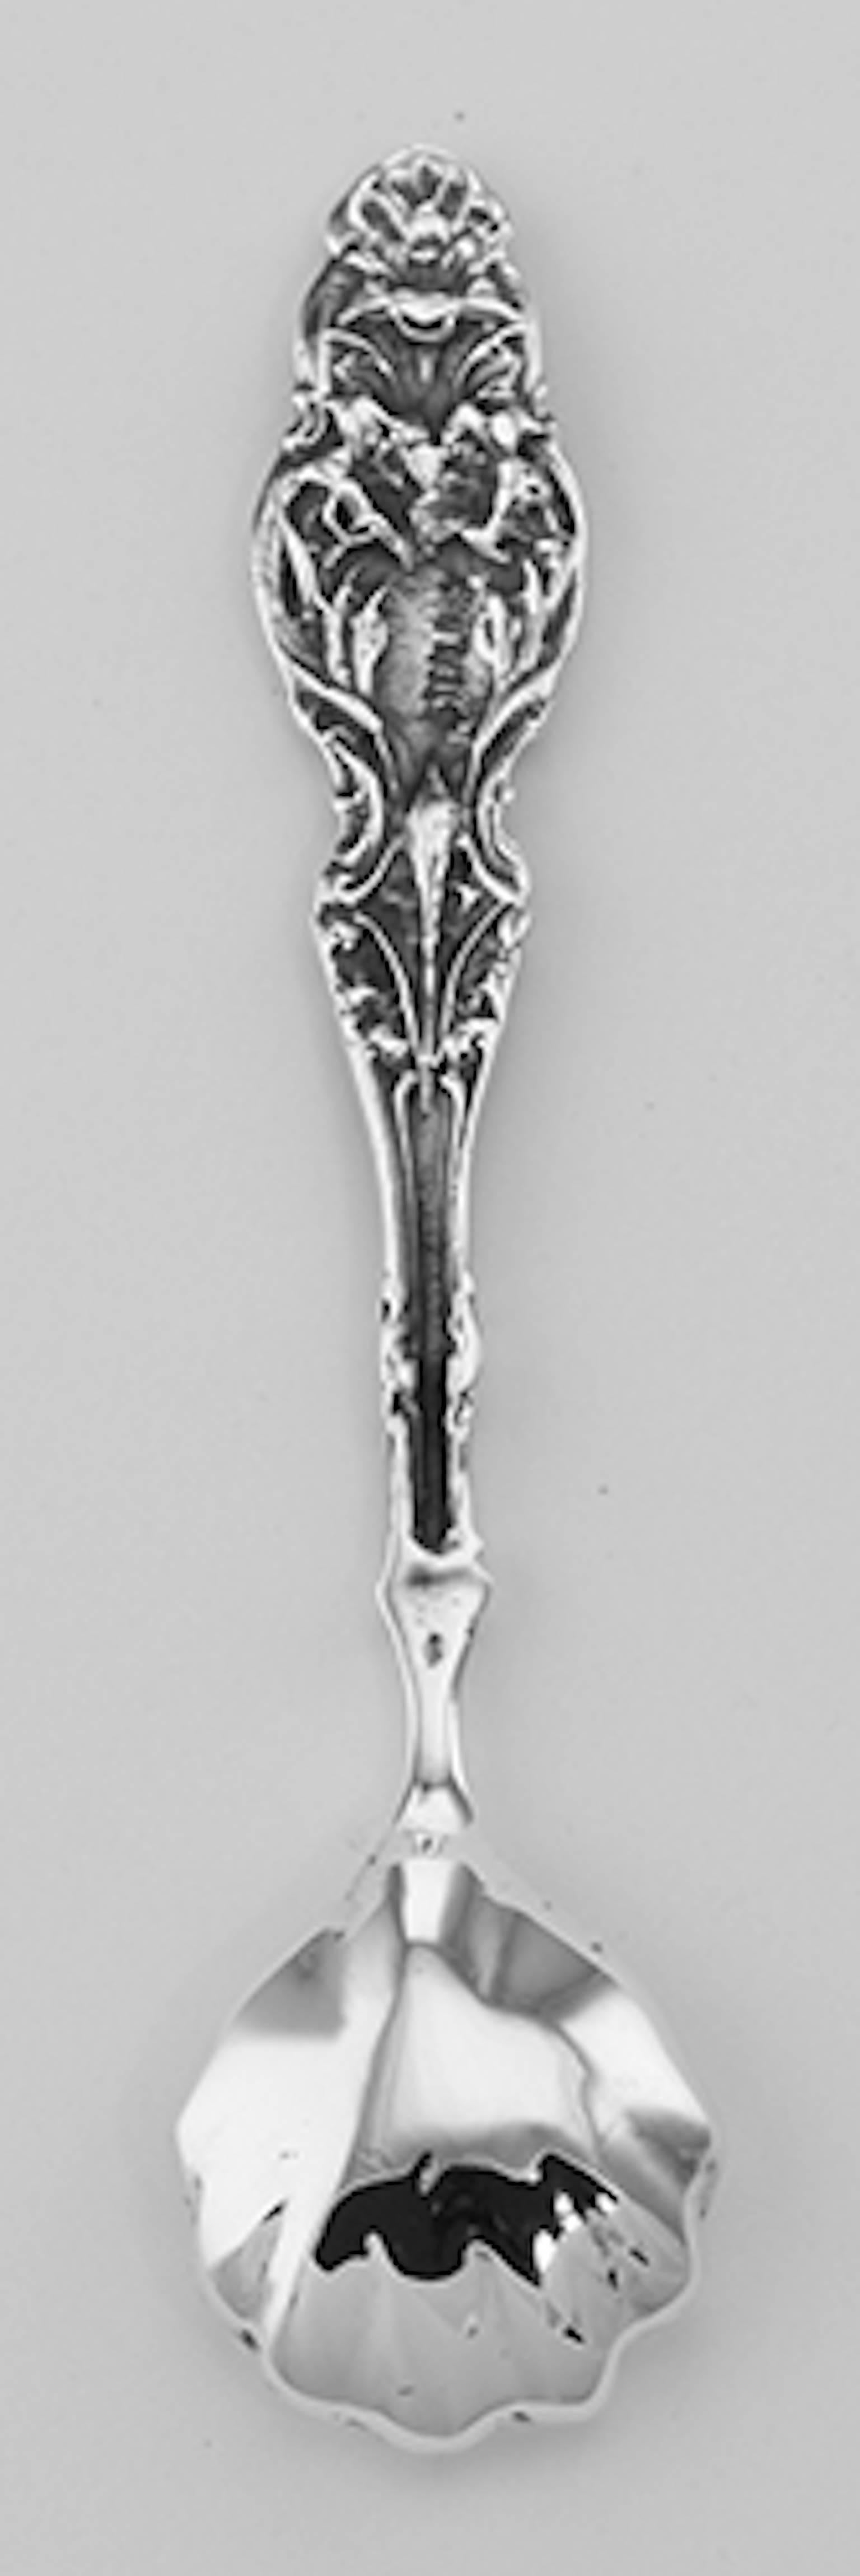 Vintage style sterling silver master salt spoon #MS-10. This salt spoon is new and a quality sterling silver antique and collectible reproduction. Measures: Width: Bowl 3/4 Inch, length: 3 1/4 inches Approximate weight: 8.1 grams. Color: Silver